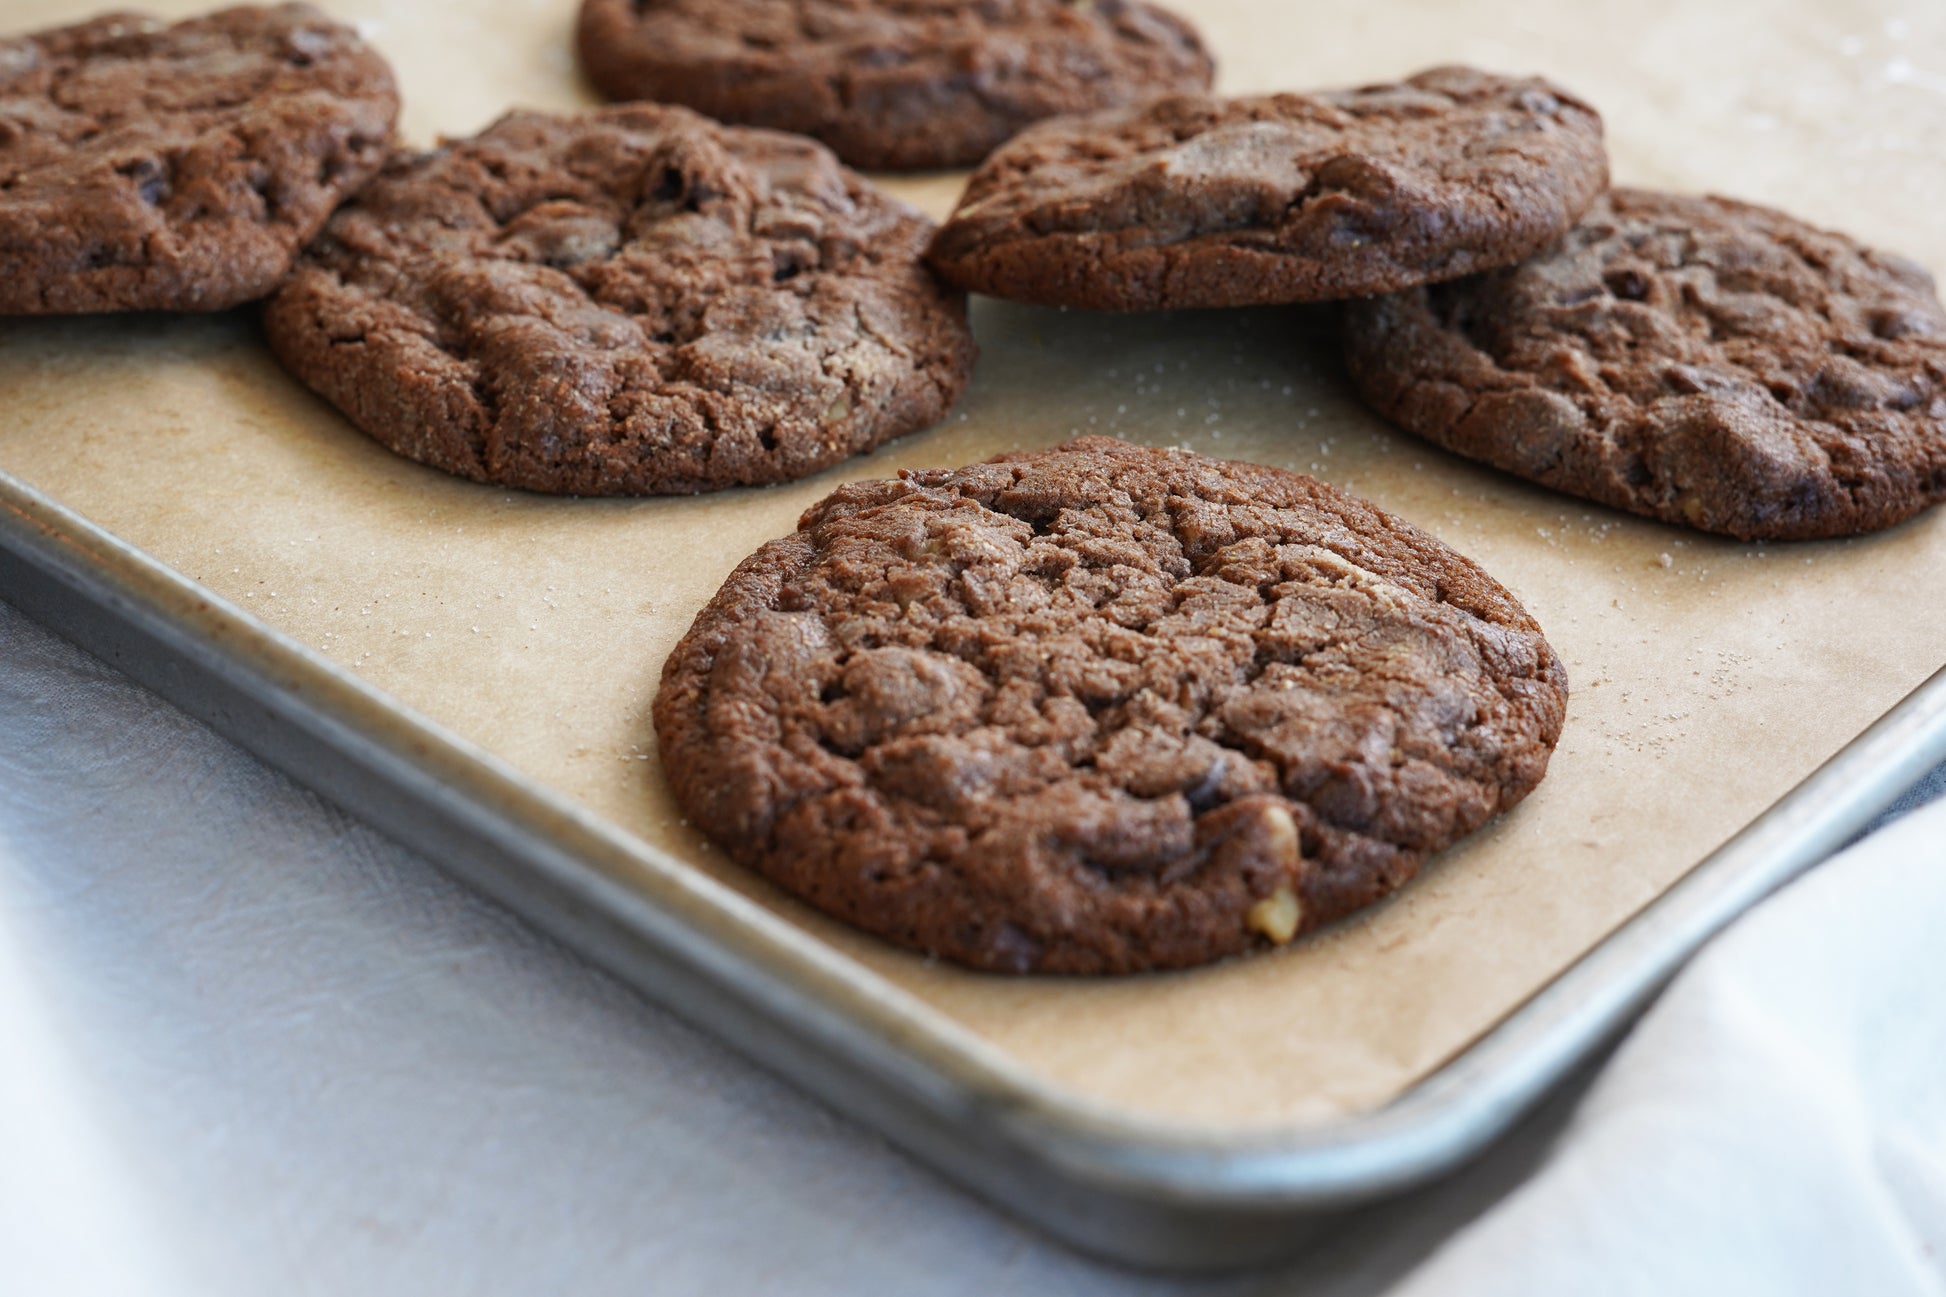 Polly's Pies Double Chocolate cookies on a baking sheet lined with parchment paper.